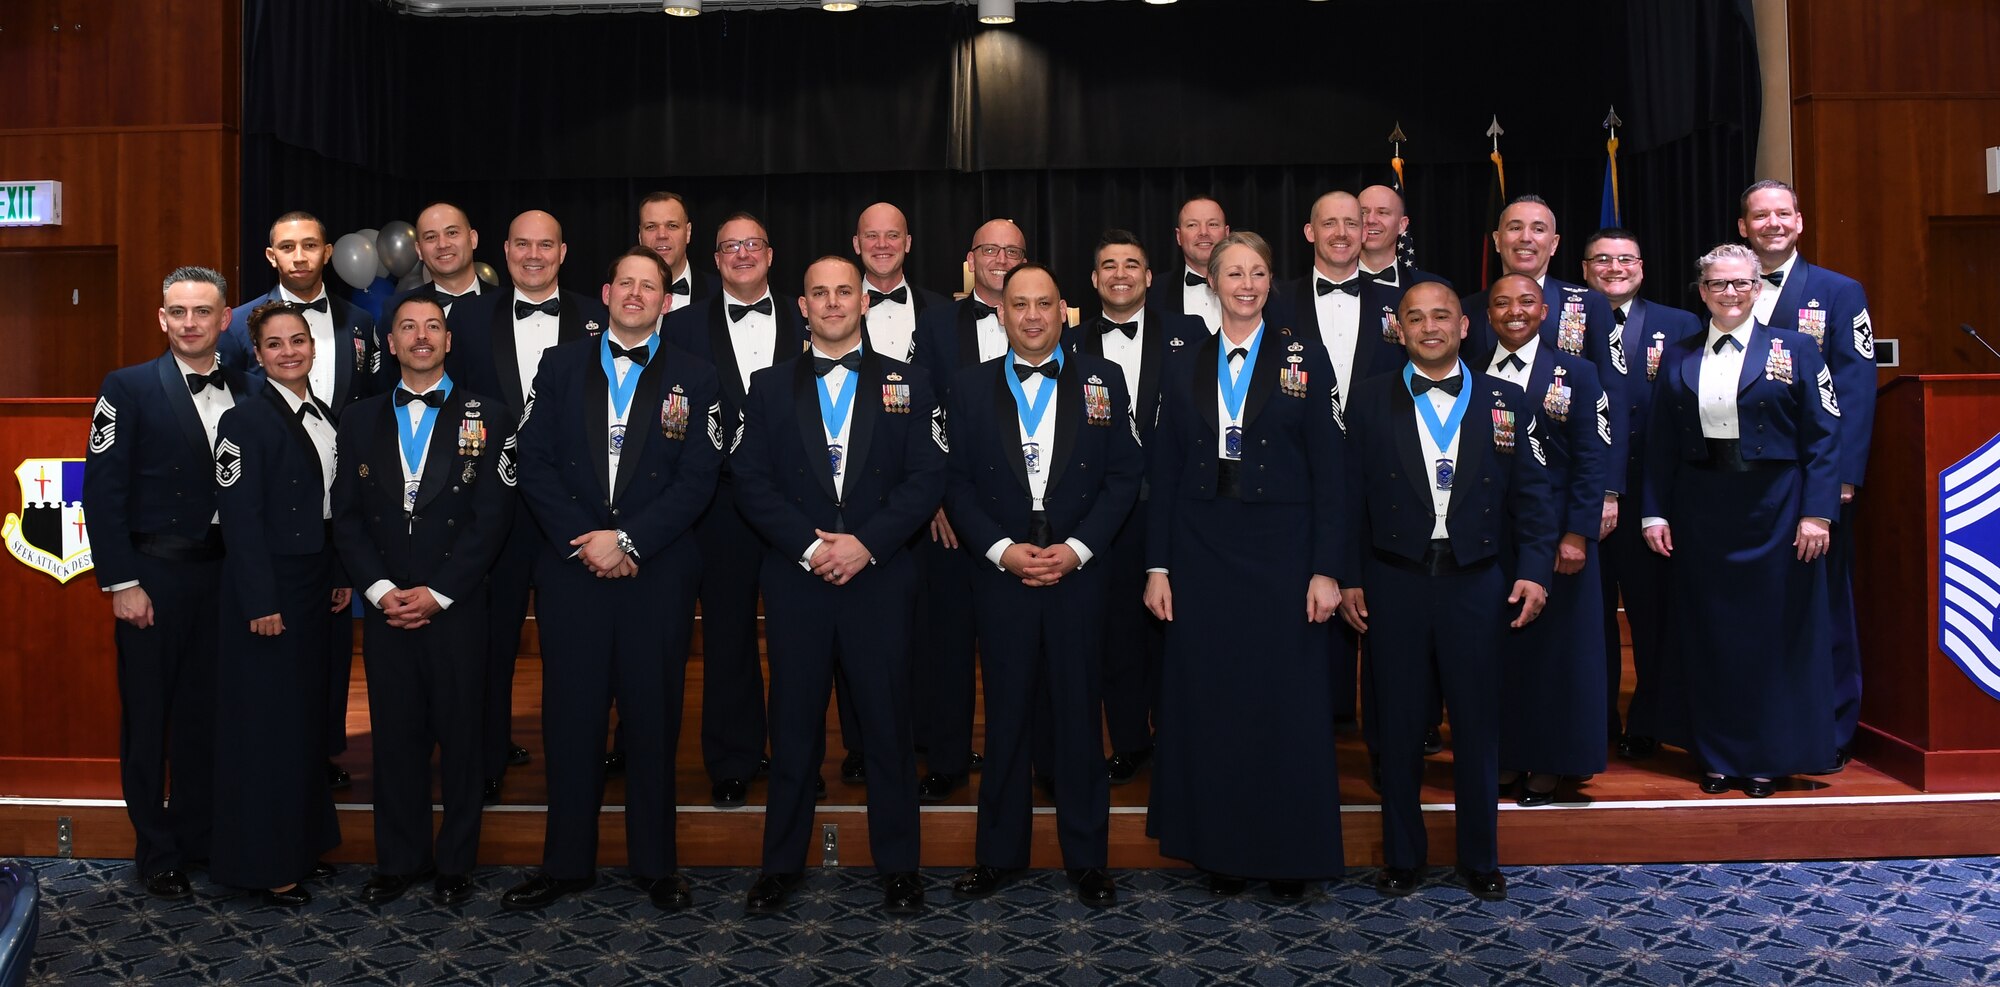 52nd Fighter Wing chief master sergeant selectees pose for a group photo with 52 FW chief master sergeants at the annual Chief Recognition Ceremony at Spangdahlem Air Base, Germany, Mar. 6, 2020. The selectees celebrated moving to the rank of chief master sergeant and enjoyed a dinner with family and friends. (U.S. Air Force photo by Airman 1st Class Alison Stewart)